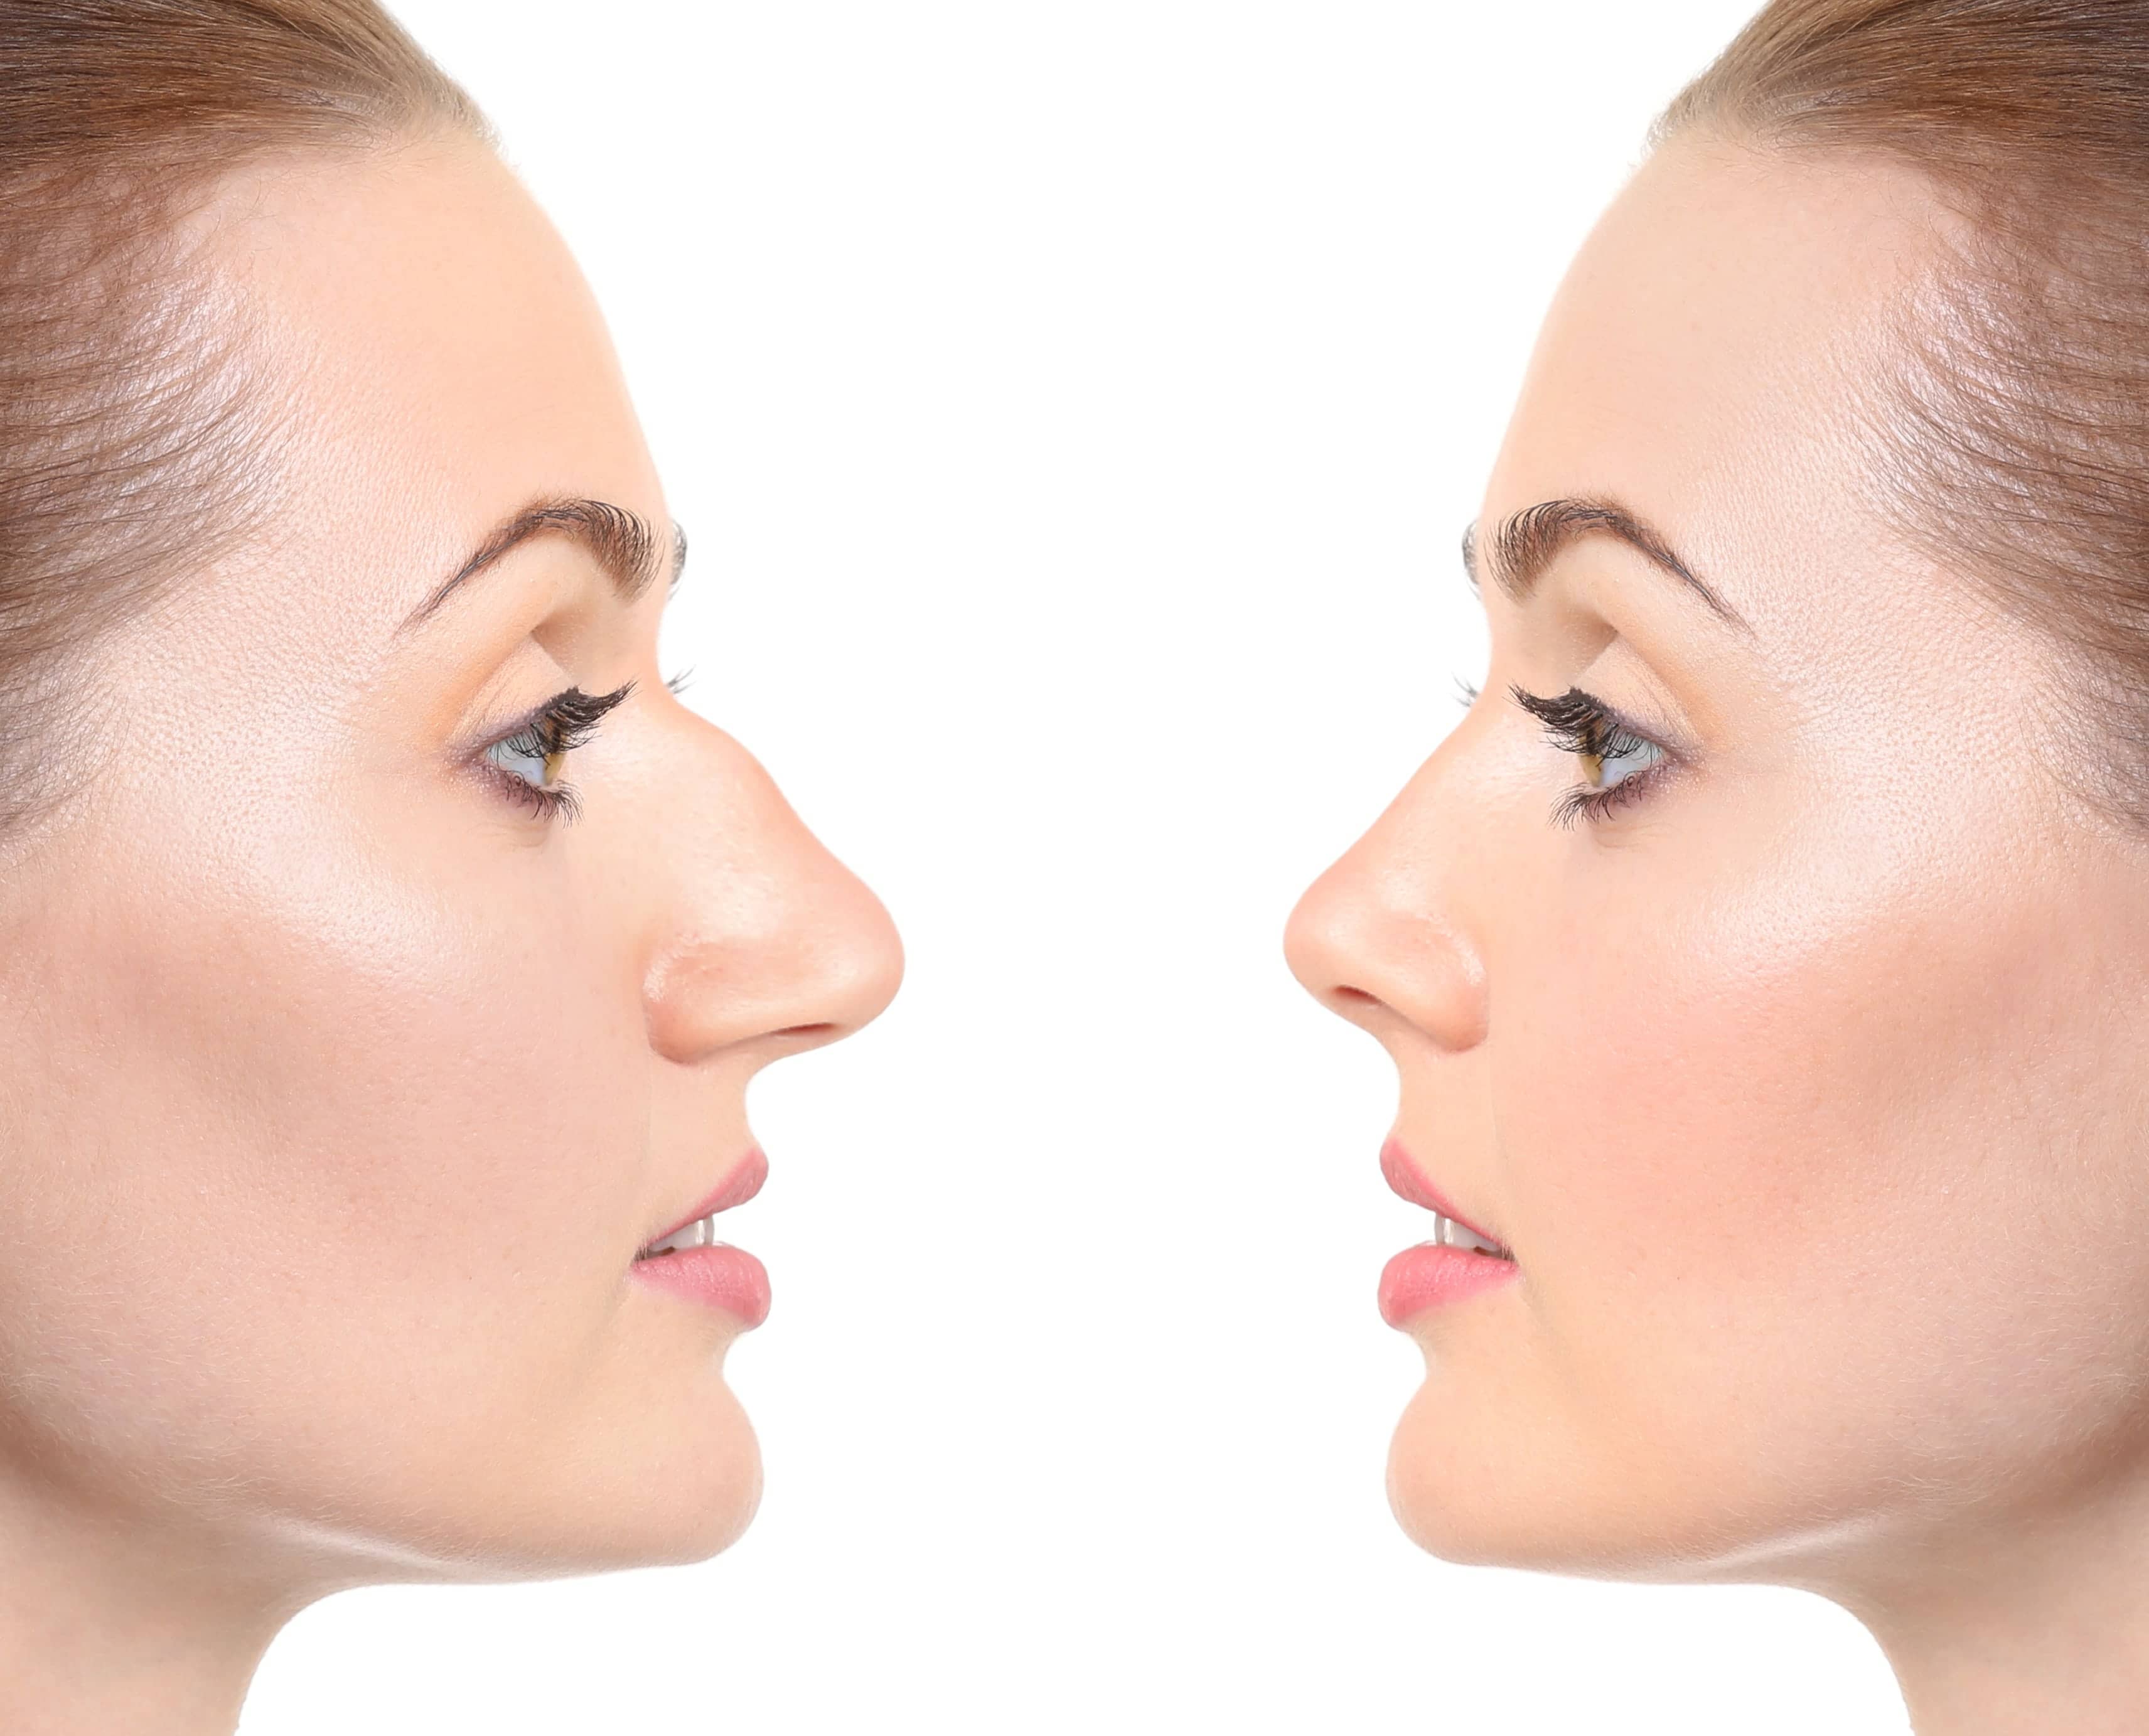 Why Do People Choose to Have Rhinoplasty - Dr. Carlos Wolf - Miami Surgeon